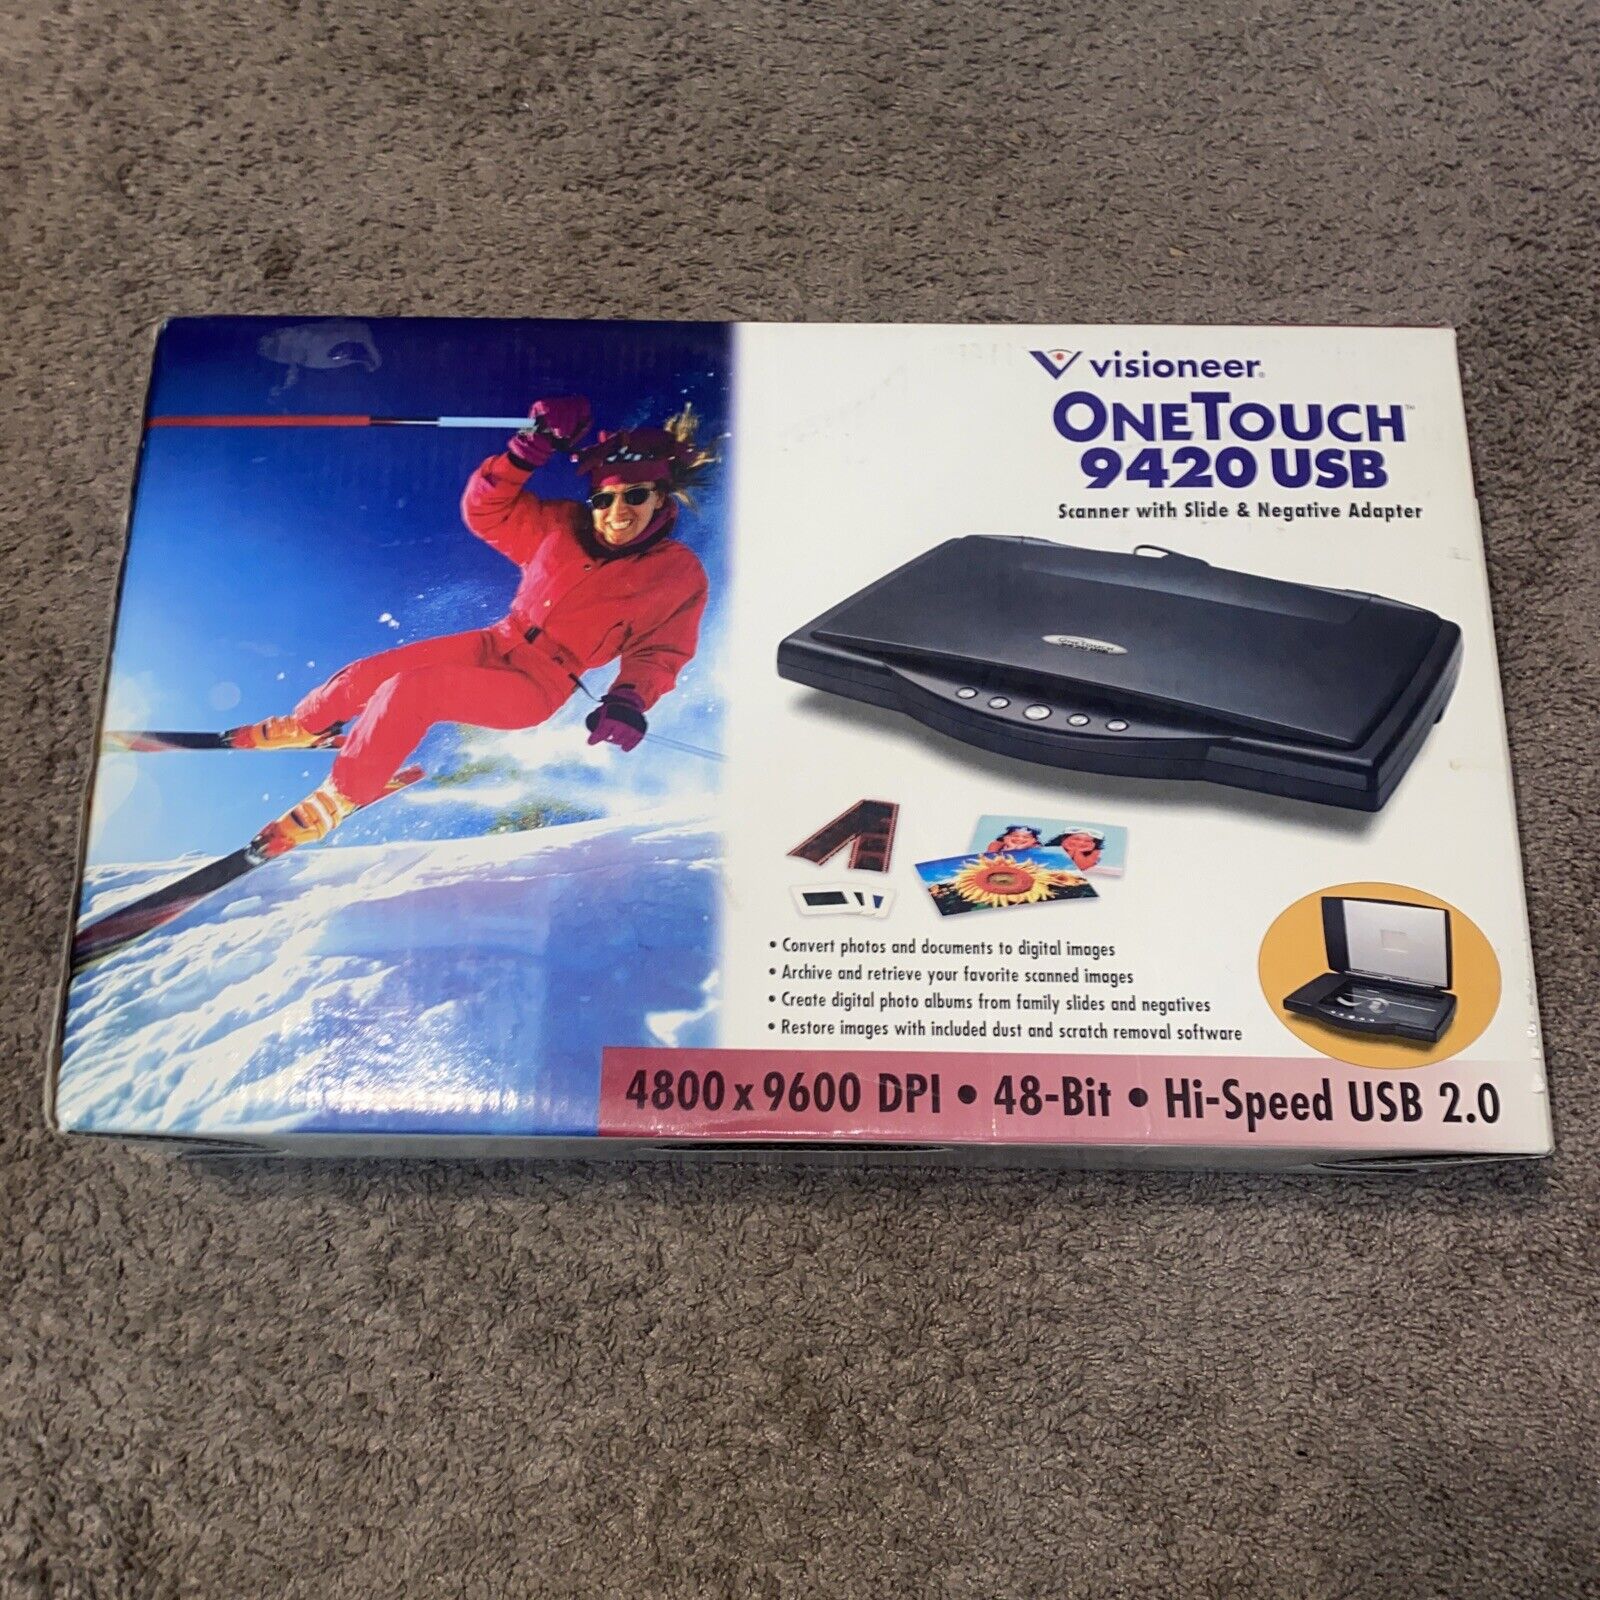 Visioneer One Touch 9420 USB Scanner With Slide & Negative Adapter BRAND NEW